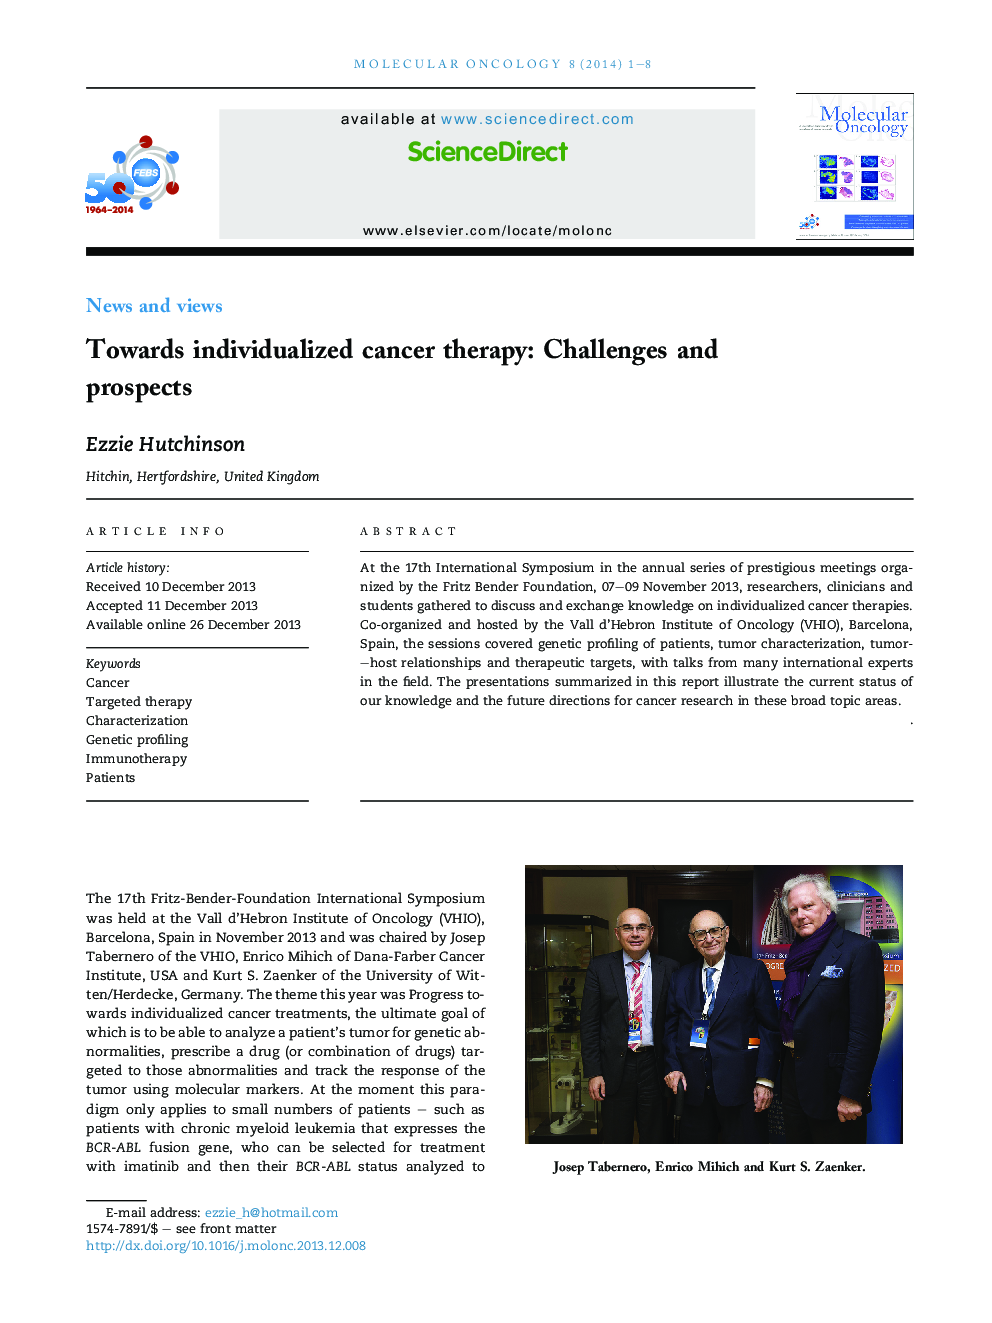 Towards individualized cancer therapy: Challenges and prospects